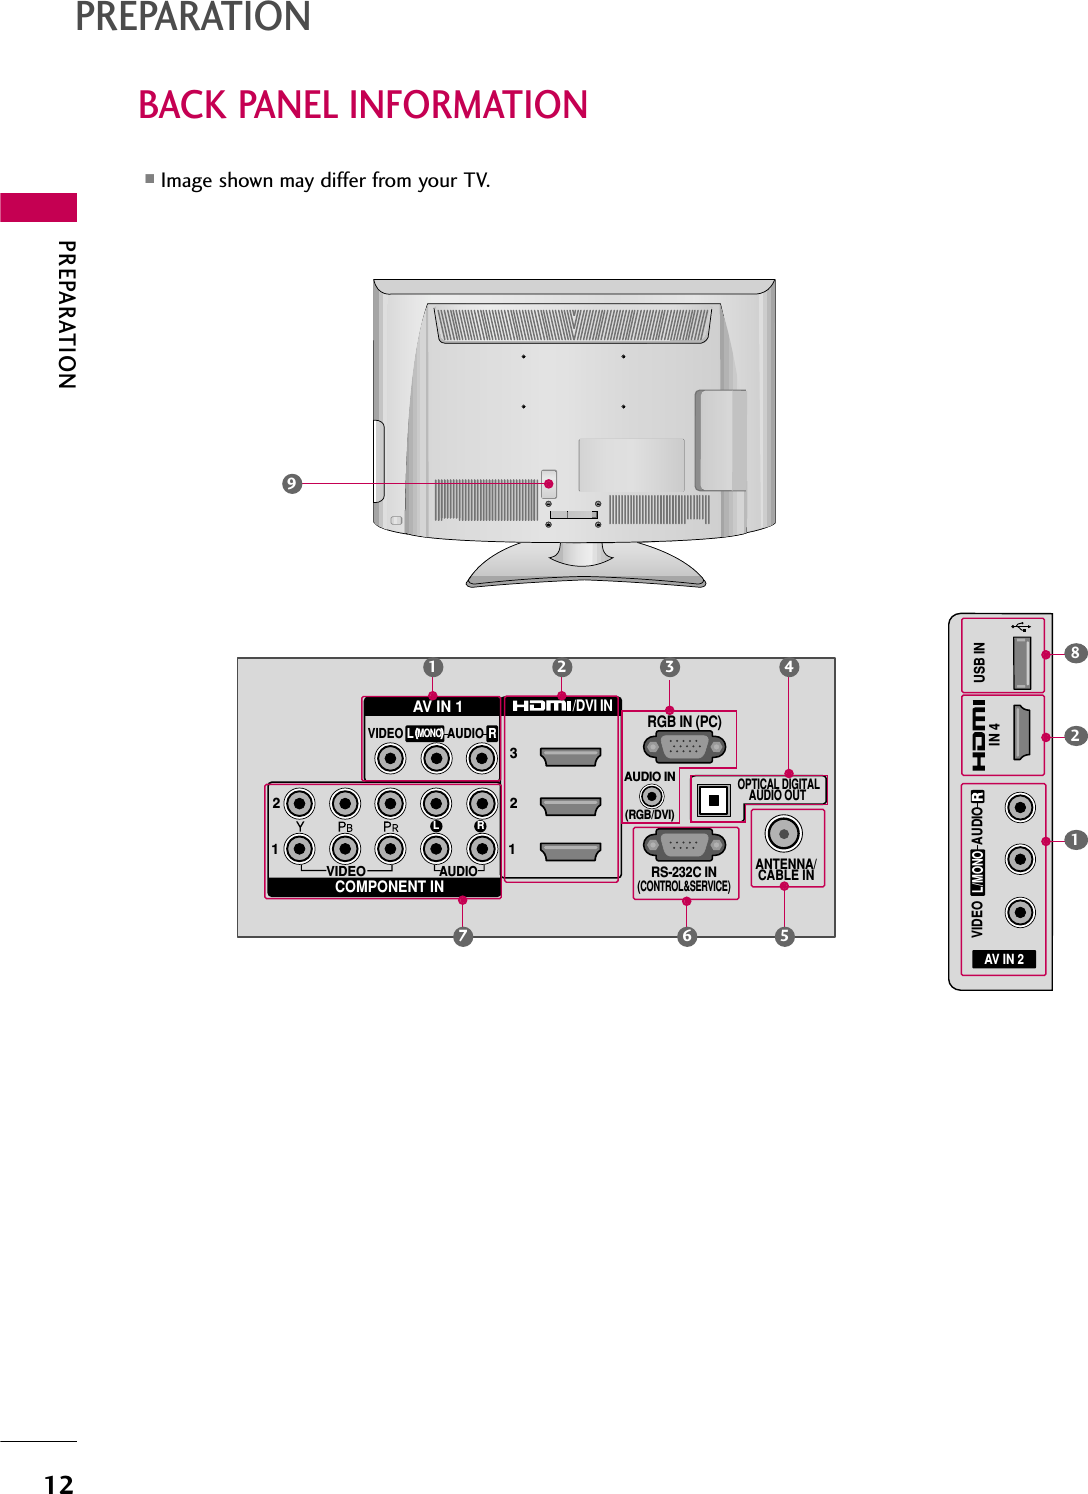 PREPARATION12BACK PANEL INFORMATIONPREPARATION■Image shown may differ from your TV.VIDEOAUDIOL RRS-232C IN(CONTROL&amp;SERVICE)AUDIO IN(RGB/DVI)OPTICAL DIGITALAUDIO OUT ANTENNA/CABLE INRGB IN (PC)AV IN 1COMPONENT IN23121MONO( )AUDIOVIDEO/DVI INLR1 2 36 579AV IN 2L/MONORAUDIOVIDEOUSB ININ 41824